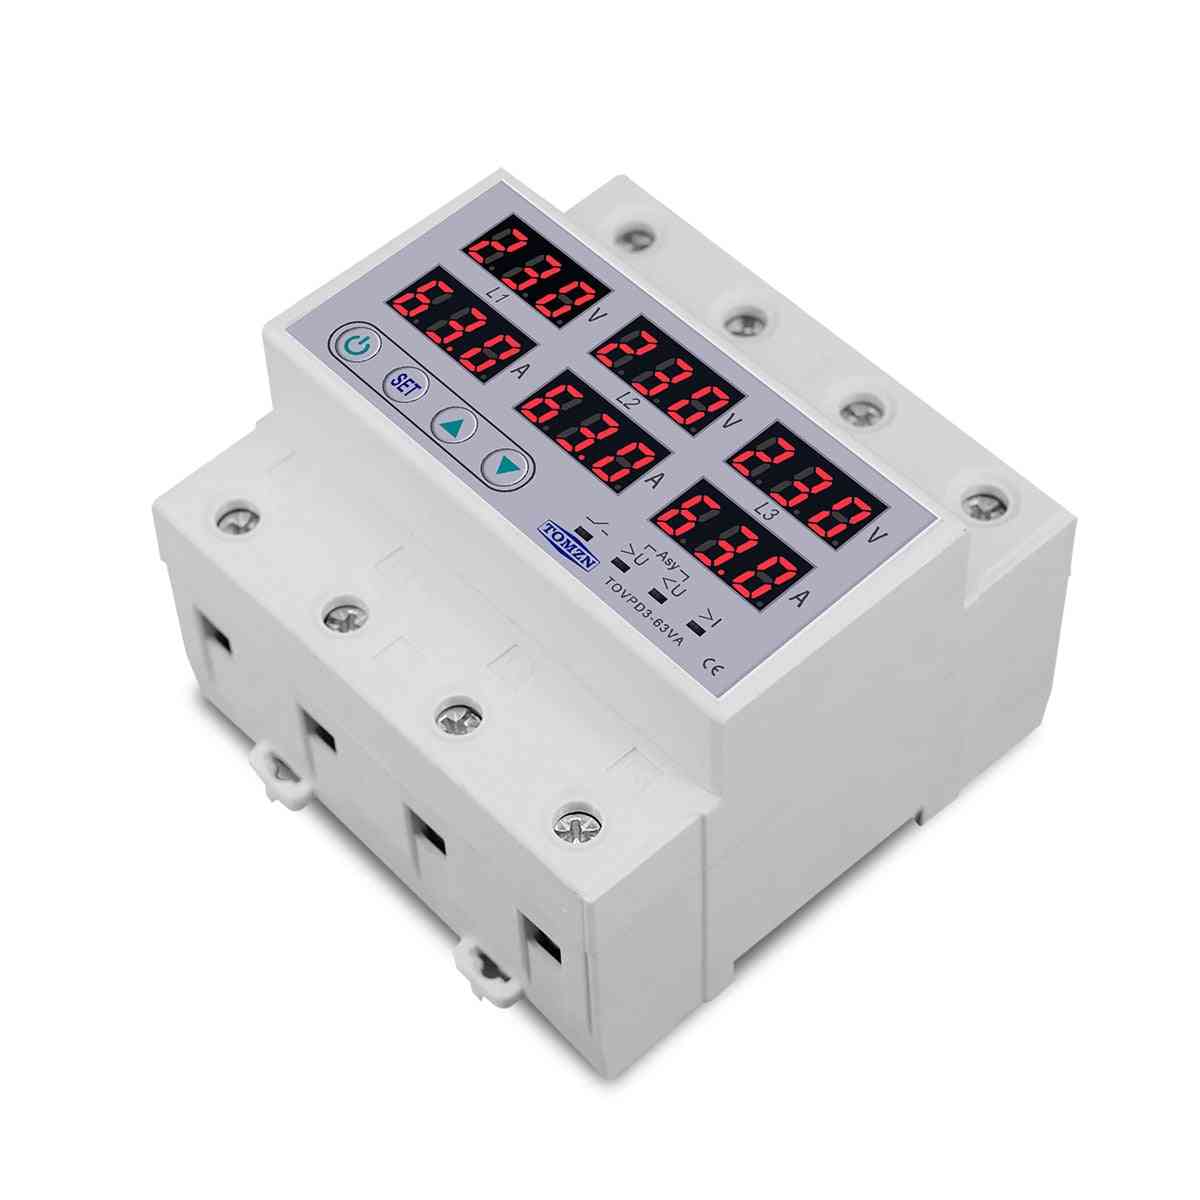 Adjustable Over And Under Voltage, Current Limit Protection Monitor, Relays Protector